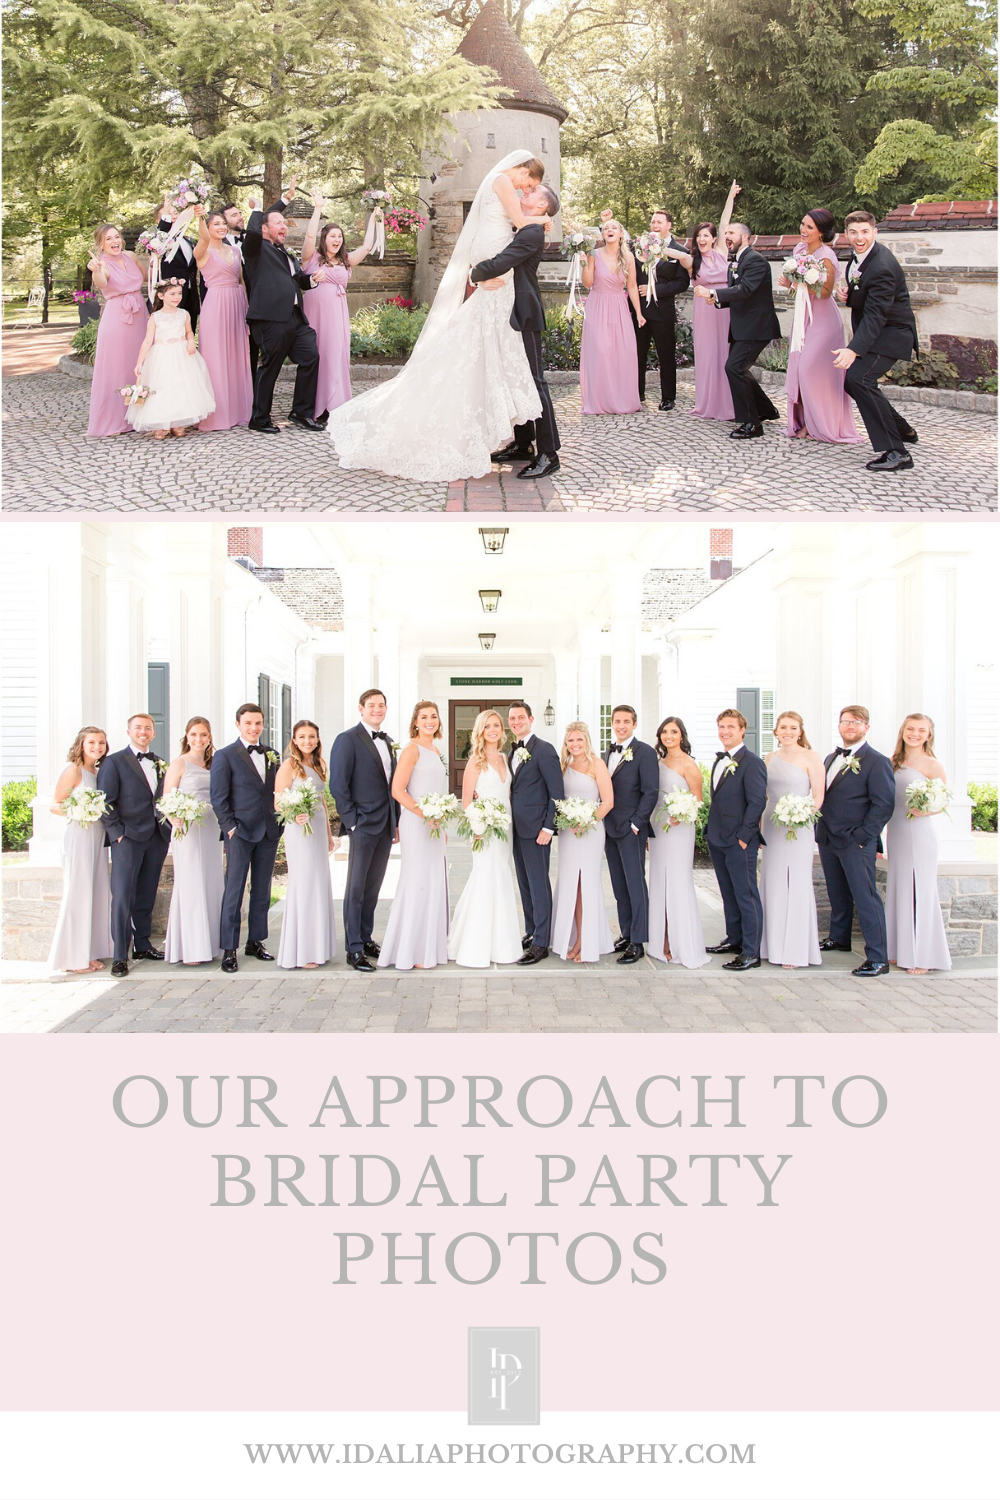 Our approach to bridal party photos